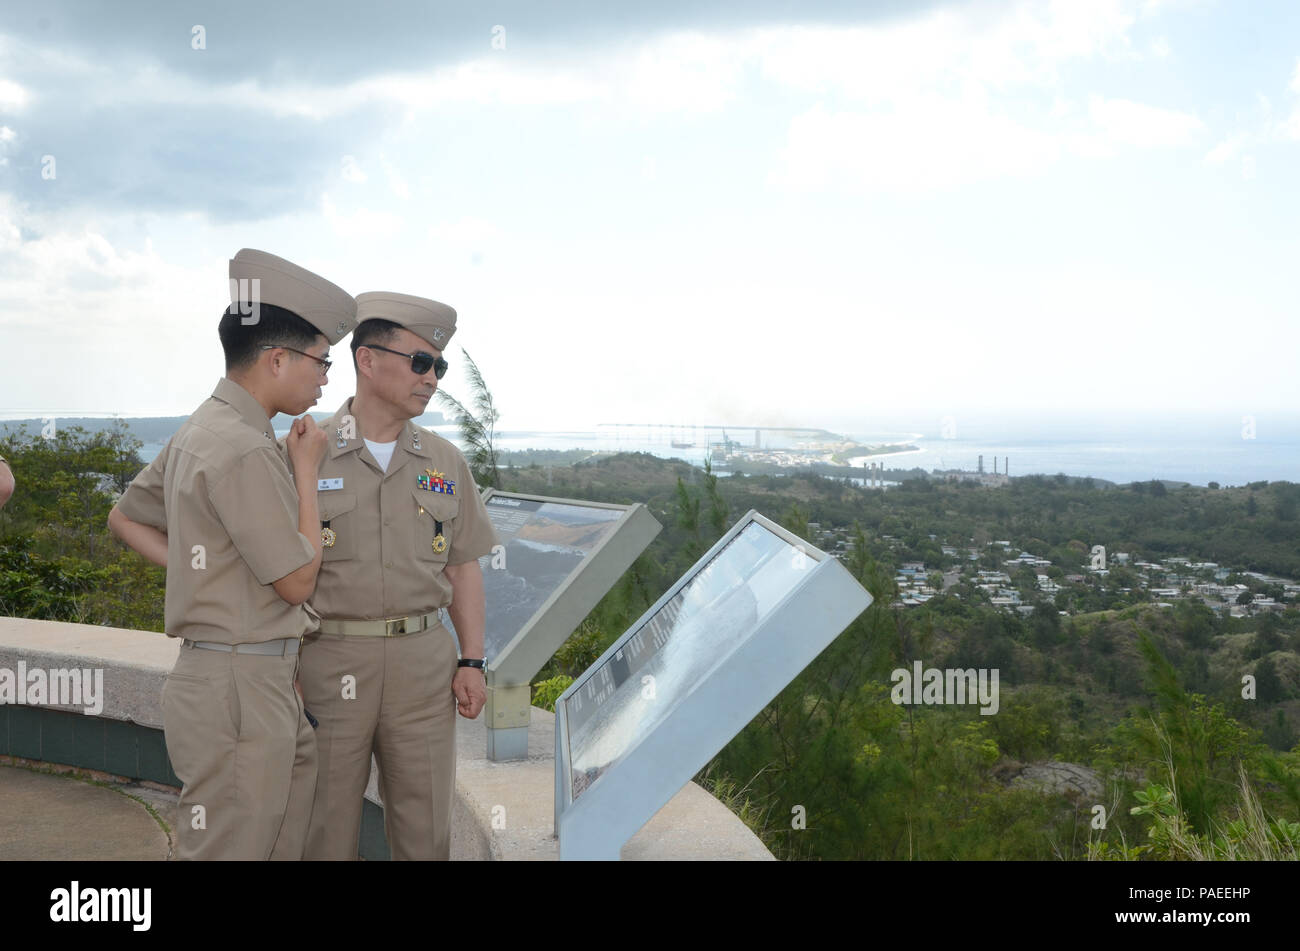 160331-N-YM720-242 SANTA RITA, Guam (March 31, 2016) Rear Adm. Youn Jeong Sang, commander, Submarine Force, Republic of Korea Navy (ROKN), right, and Lt.j.g. Hyung Tae 'Daniel' Kim, ROKN, read a sign at the Asan Bay Overlook on Nimitz Hill after the first day of the Submarine Warfare Committee Meeting (SWCM) the following two days. SWCM is a bilateral discussion between the U.S. and ROKN submarine forces designed to foster the partnership and focuses on submarine tactics, force integraton and future submarine development. (U.S. Navy photo by MC3 Allen McNair/Released) Stock Photo